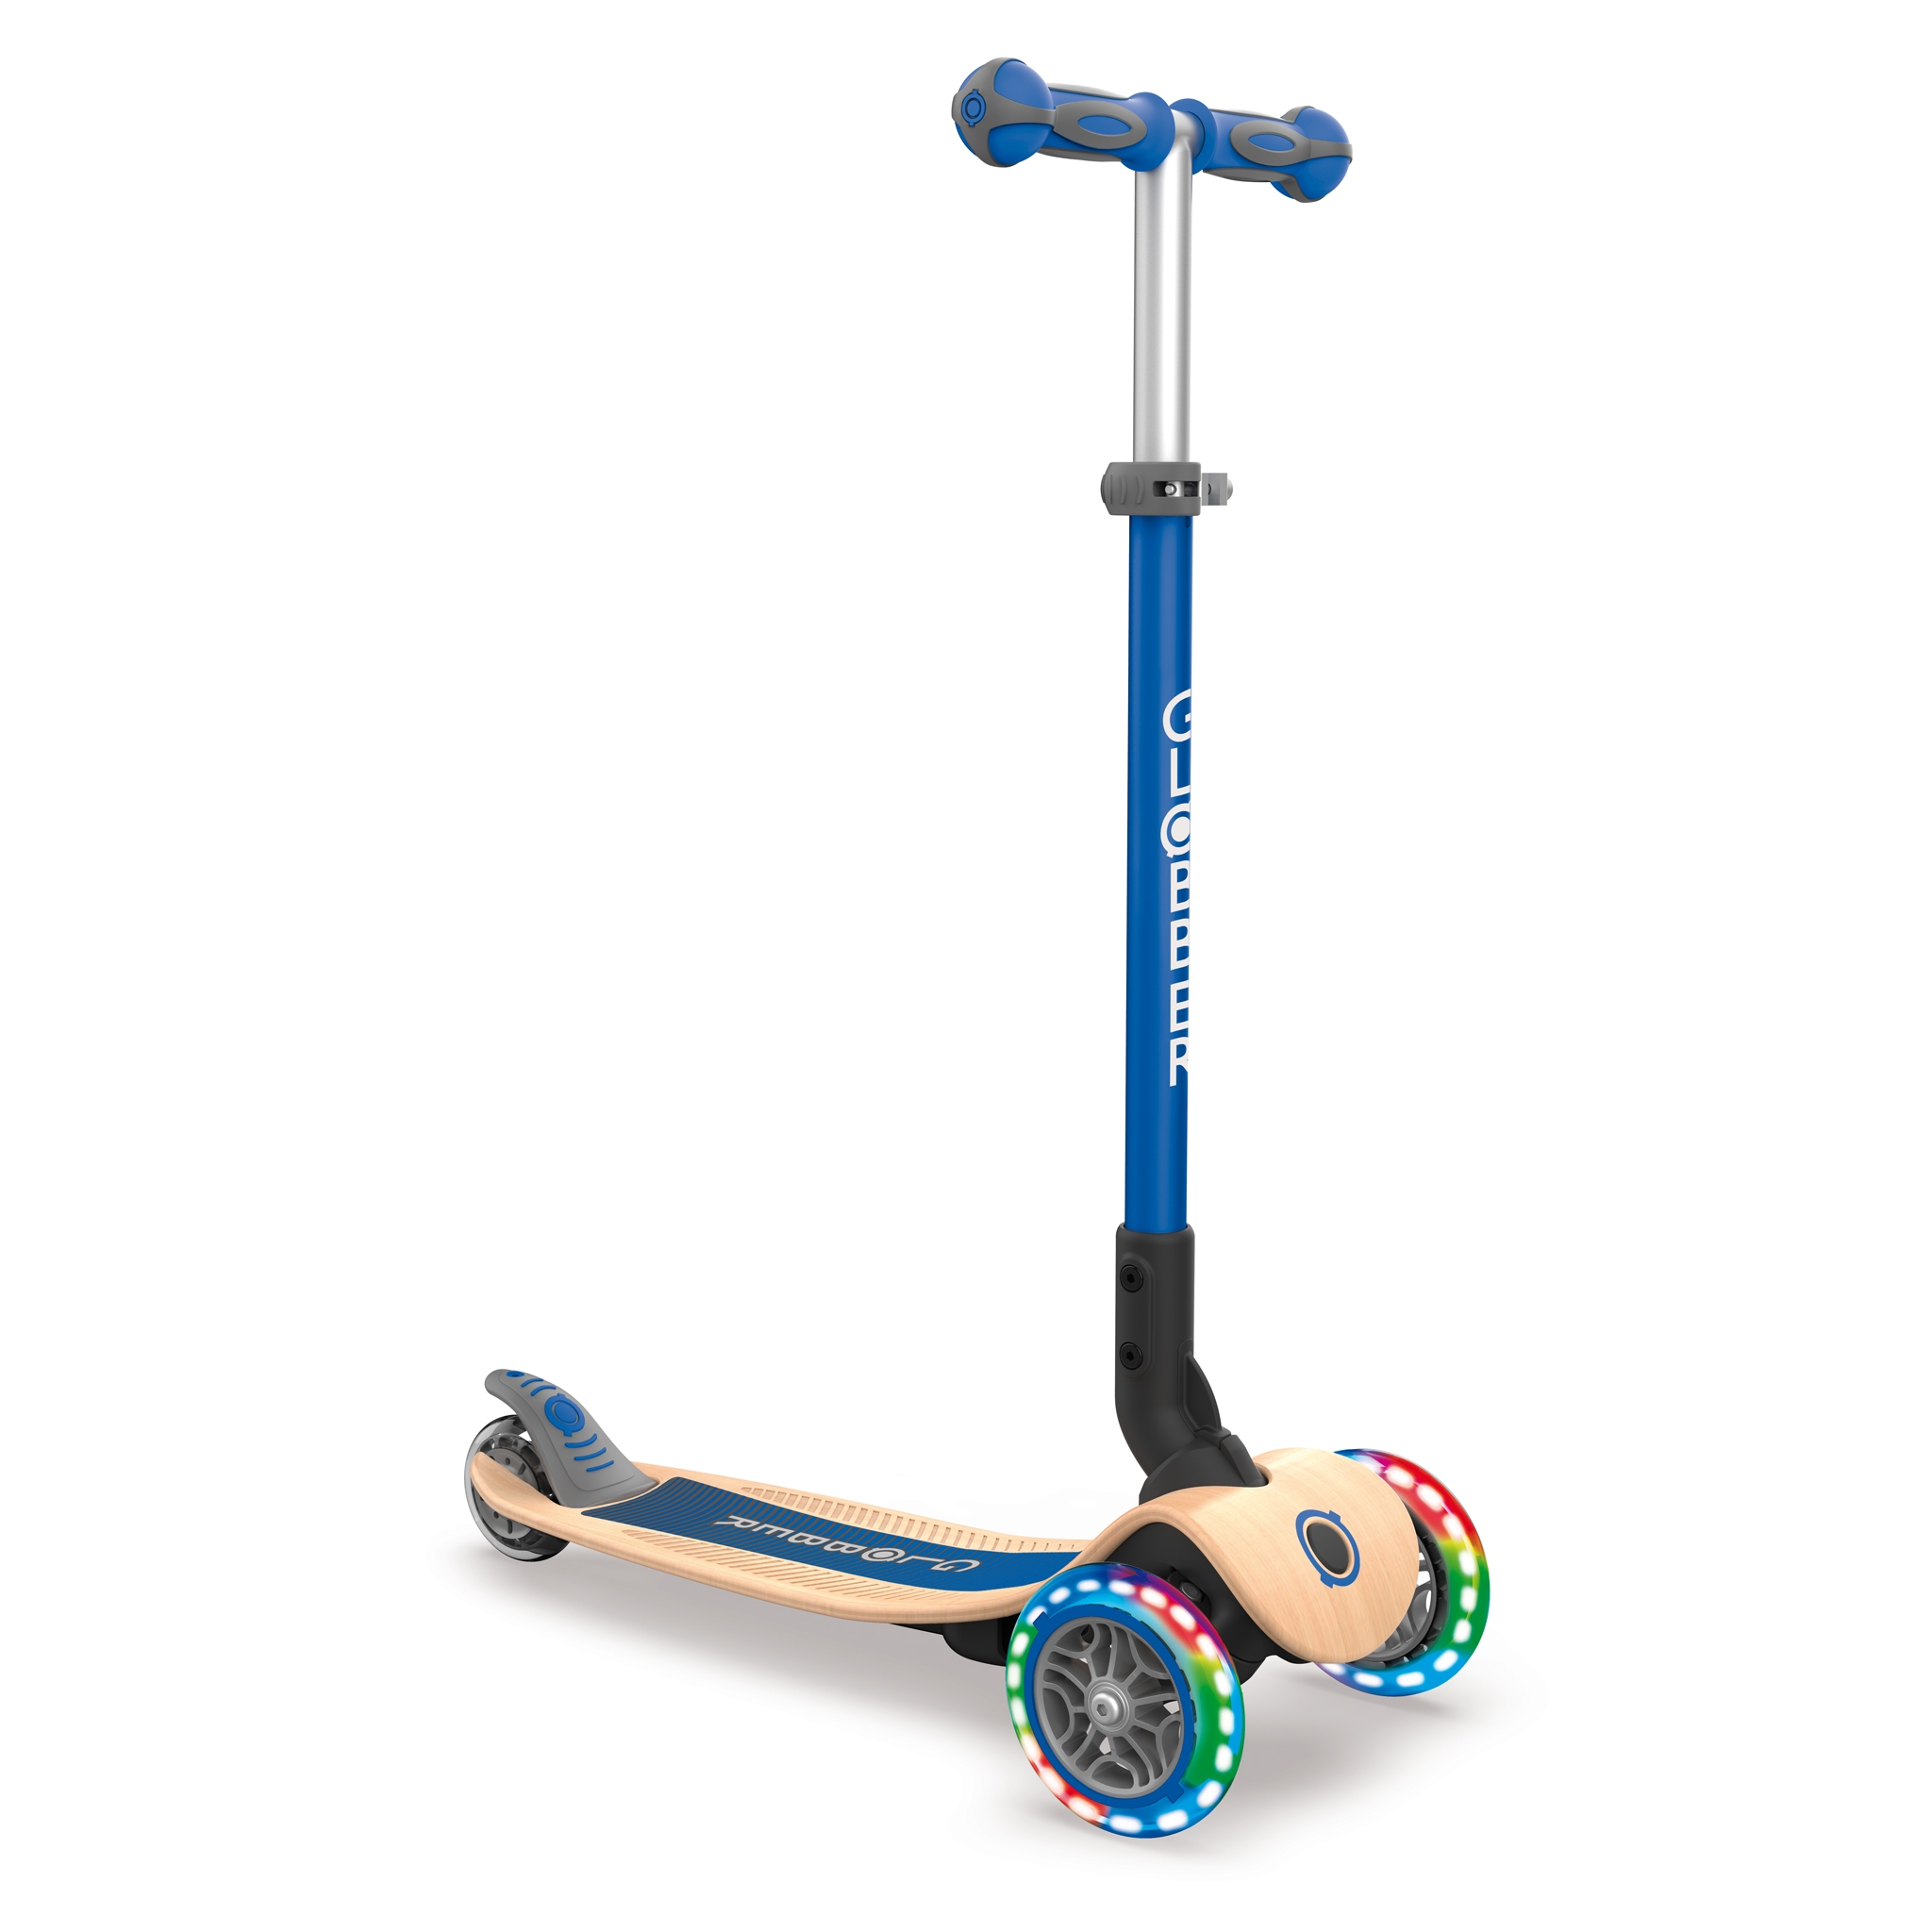 PRIMO-FOLDABLE-WOOD-LIGHTS-3-wheel-foldable-light-up-scooter-with-FSC-certified-7-ply-wooden-scooter-deck_navy-blue 0